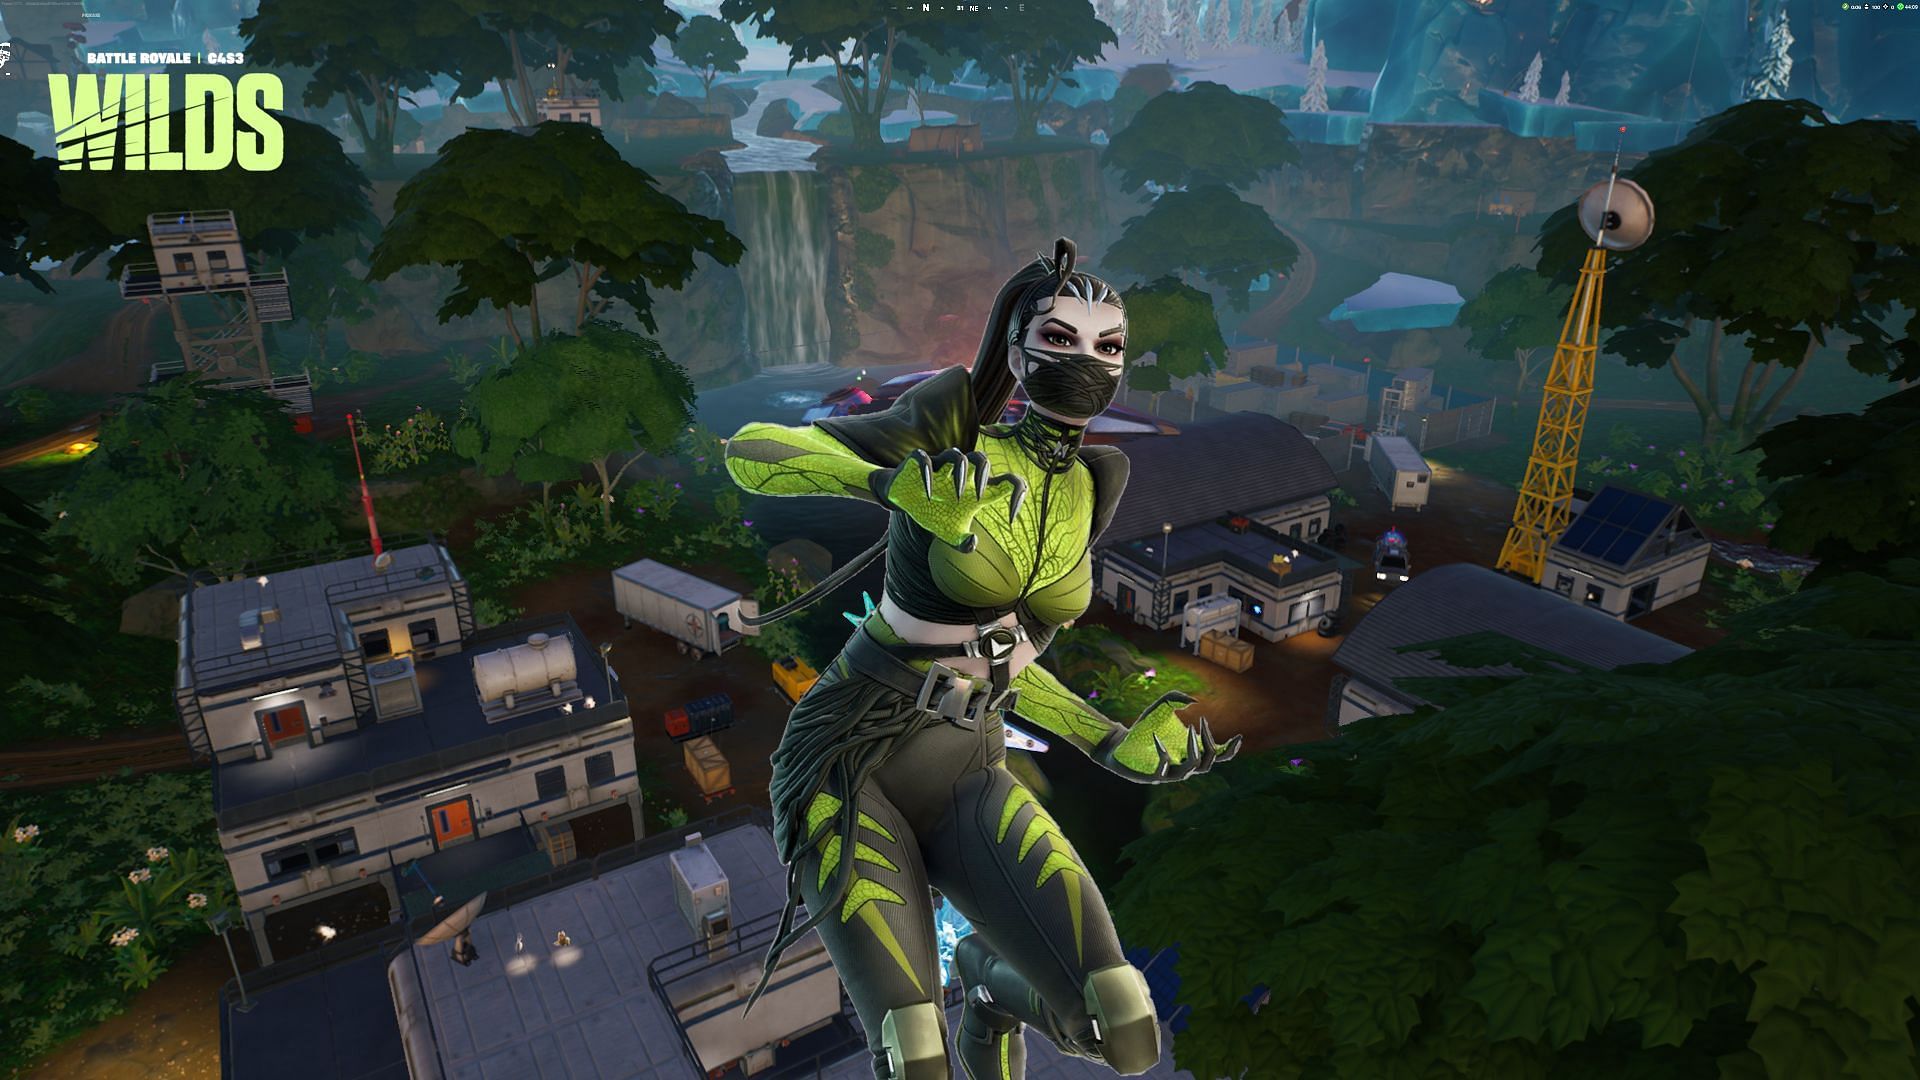 Viper from Valorant is unofficially in Fortnite (Image via Epic Games/Fortnite)